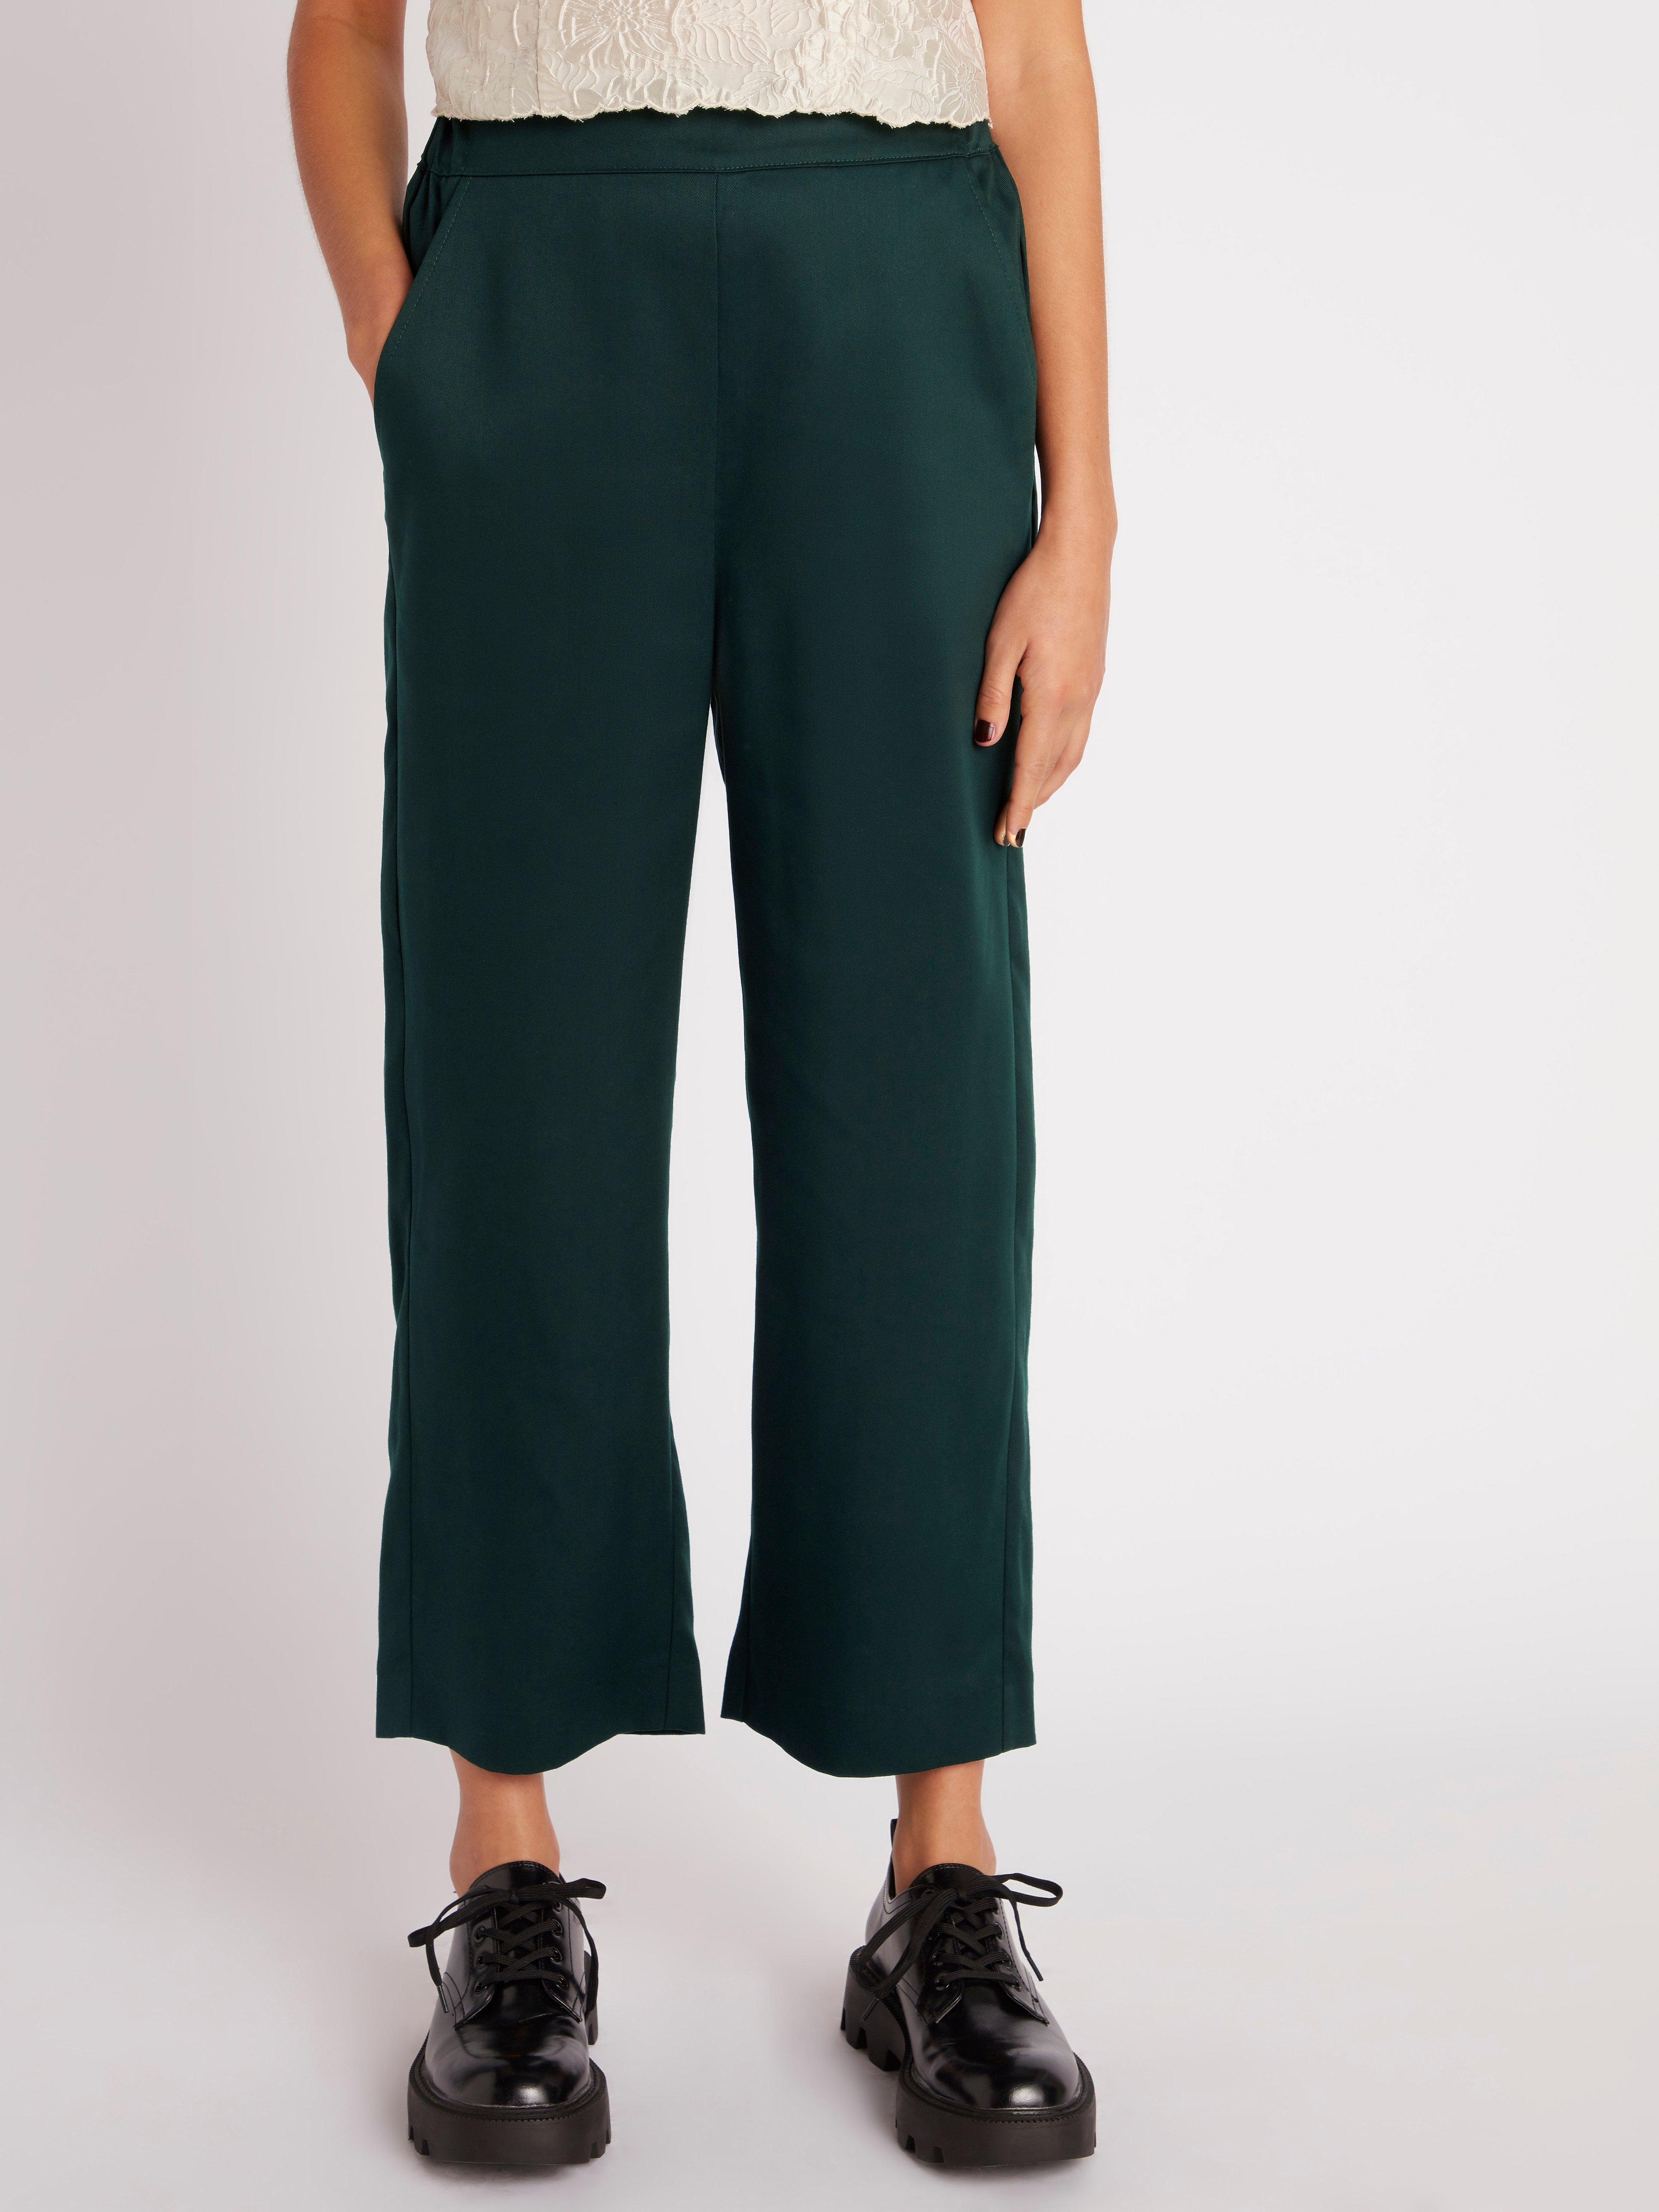 green high waisted trousers